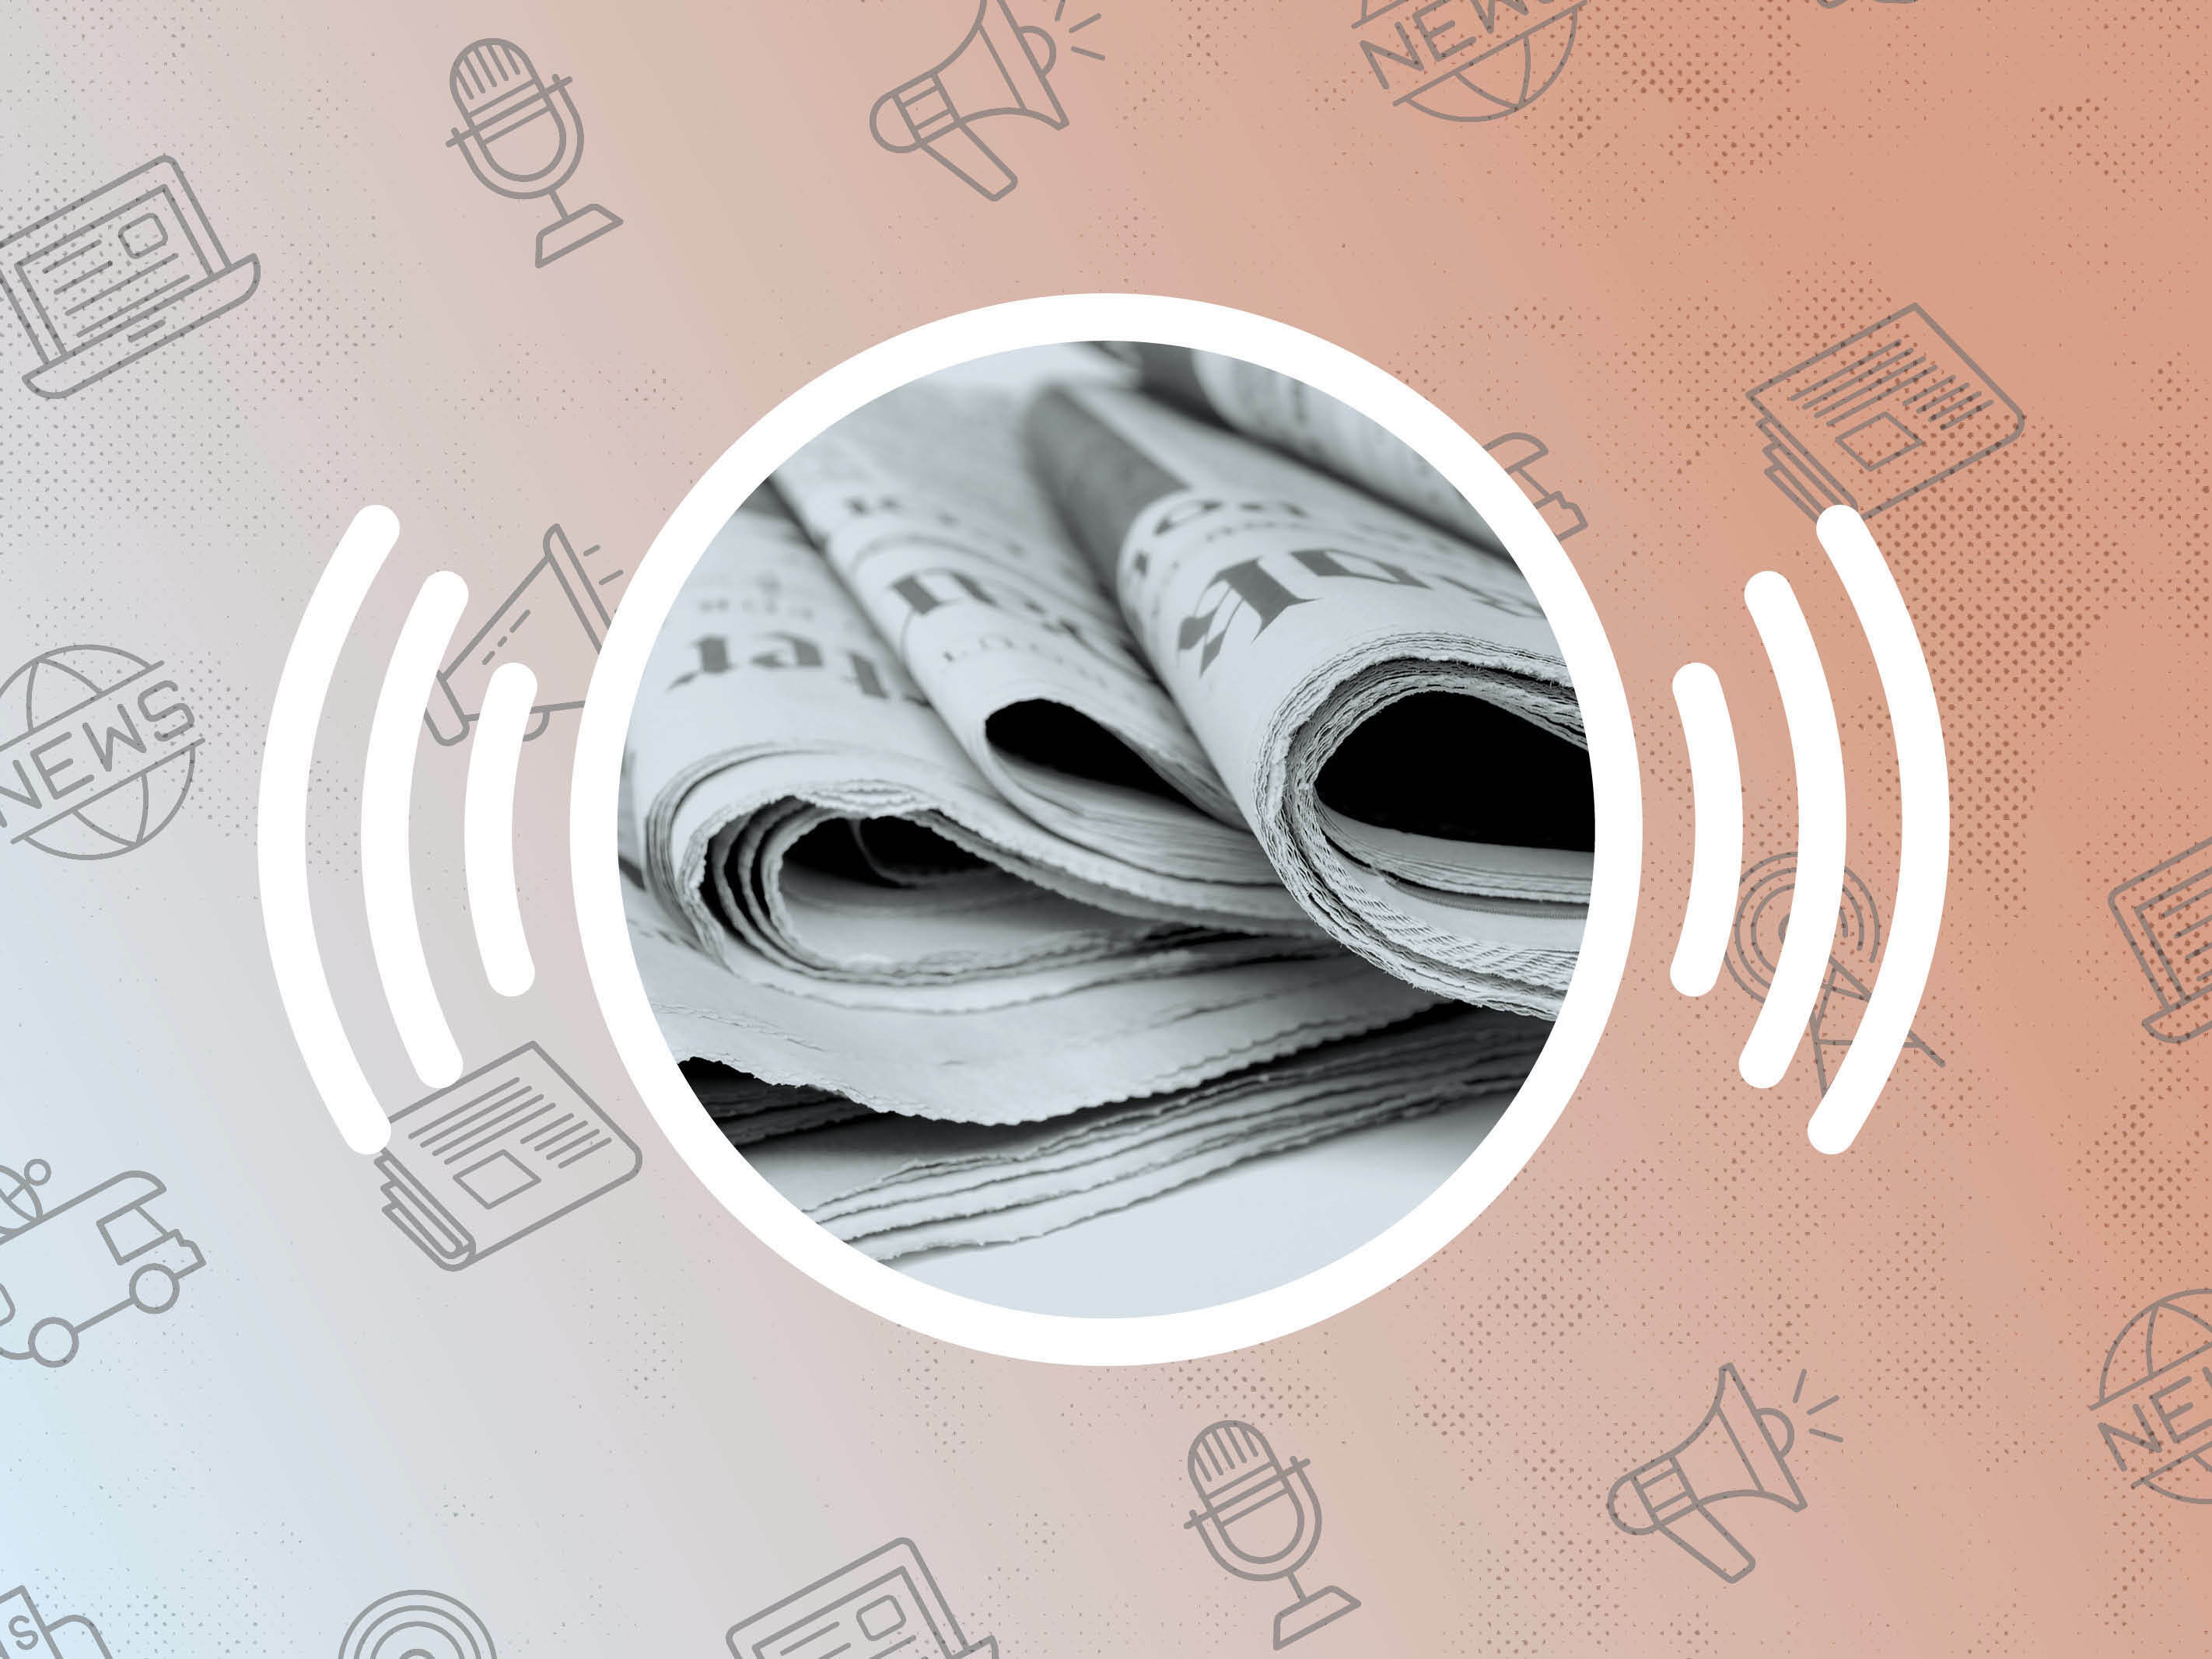 The 14 best news podcasts for breaking stories and analysis